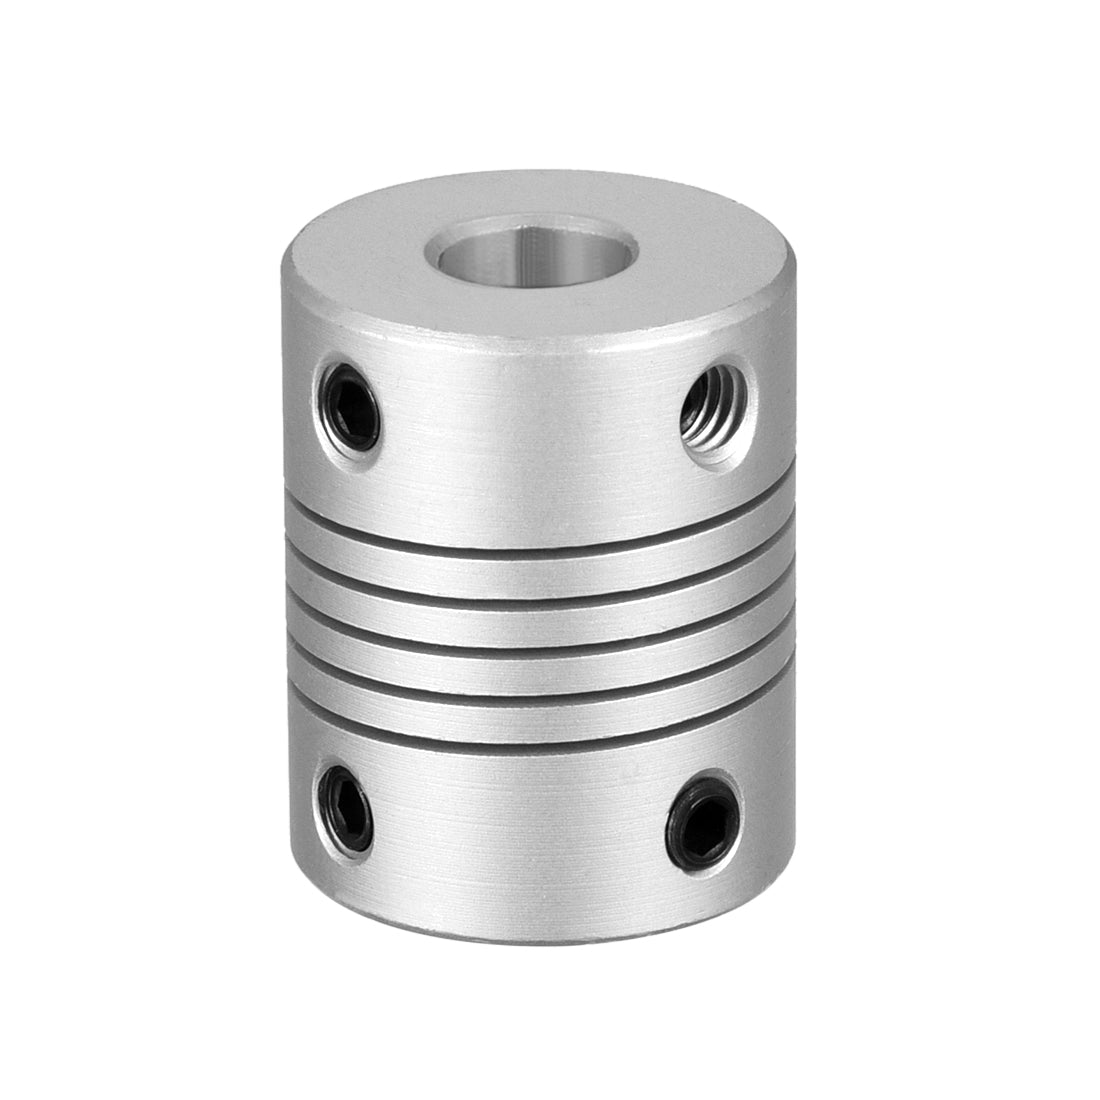 uxcell Uxcell 8mm to 8mm Aluminum Alloy Shaft Coupling Flexible Coupler Motor Connector Joint L25xD19 Silver